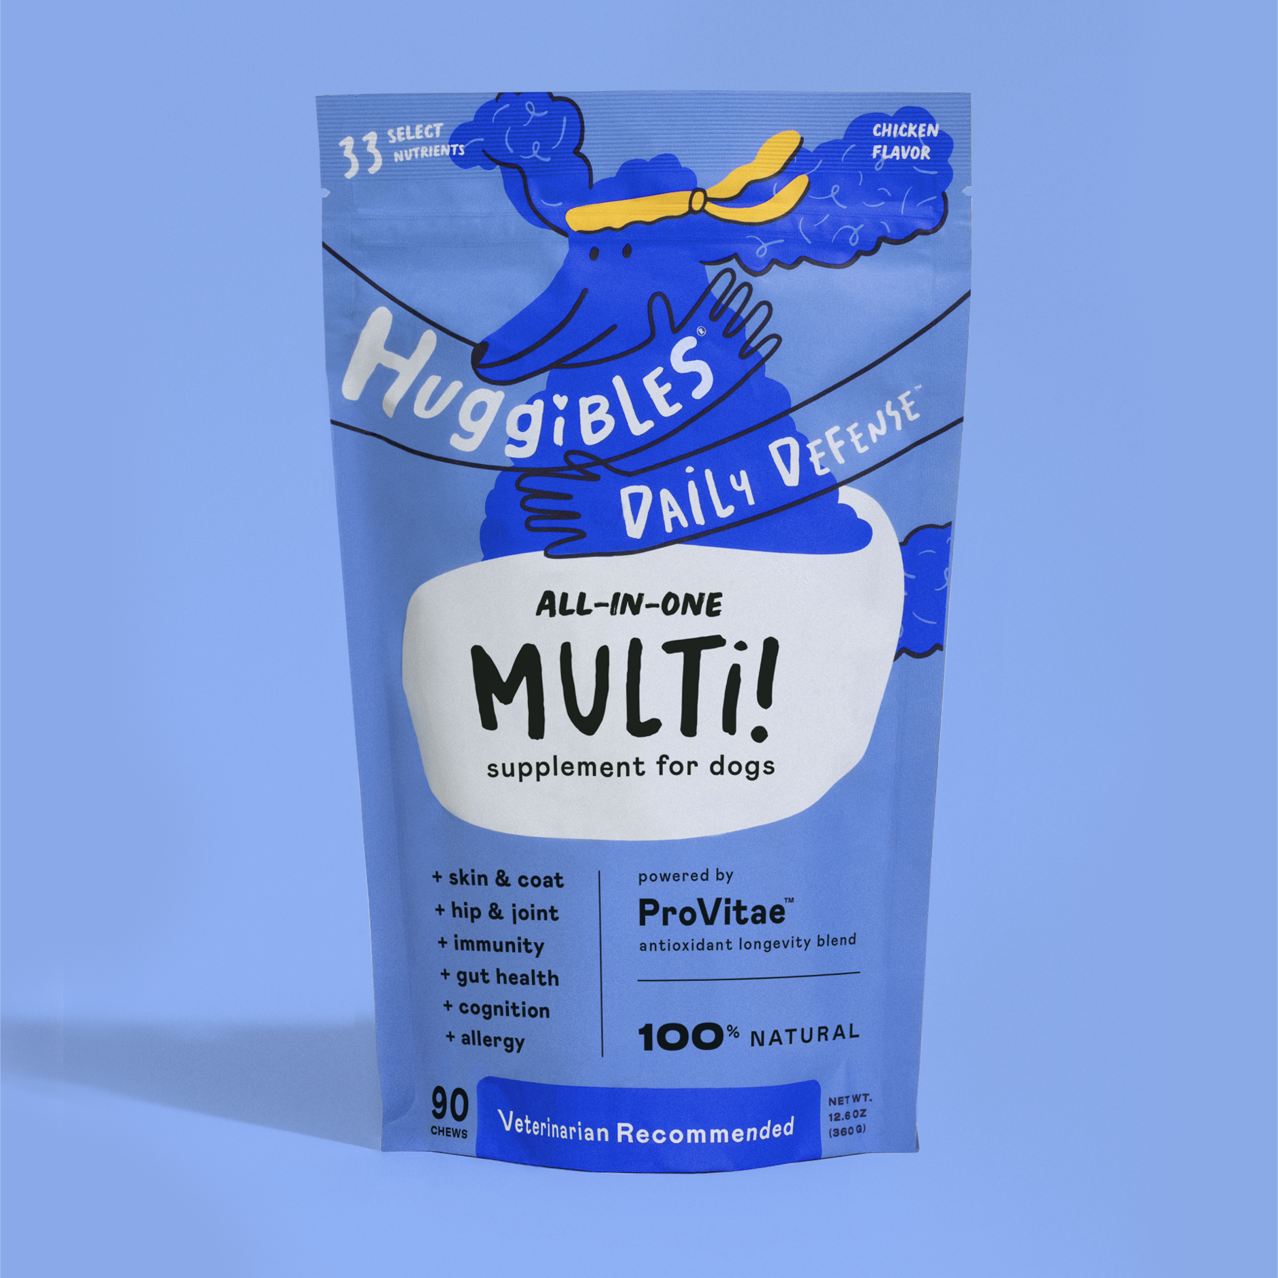 Blue bag of Huggibles All-In-One Multi! supplement for dogs showing pet supplement packaging and linking to pet marketing branding strategy.